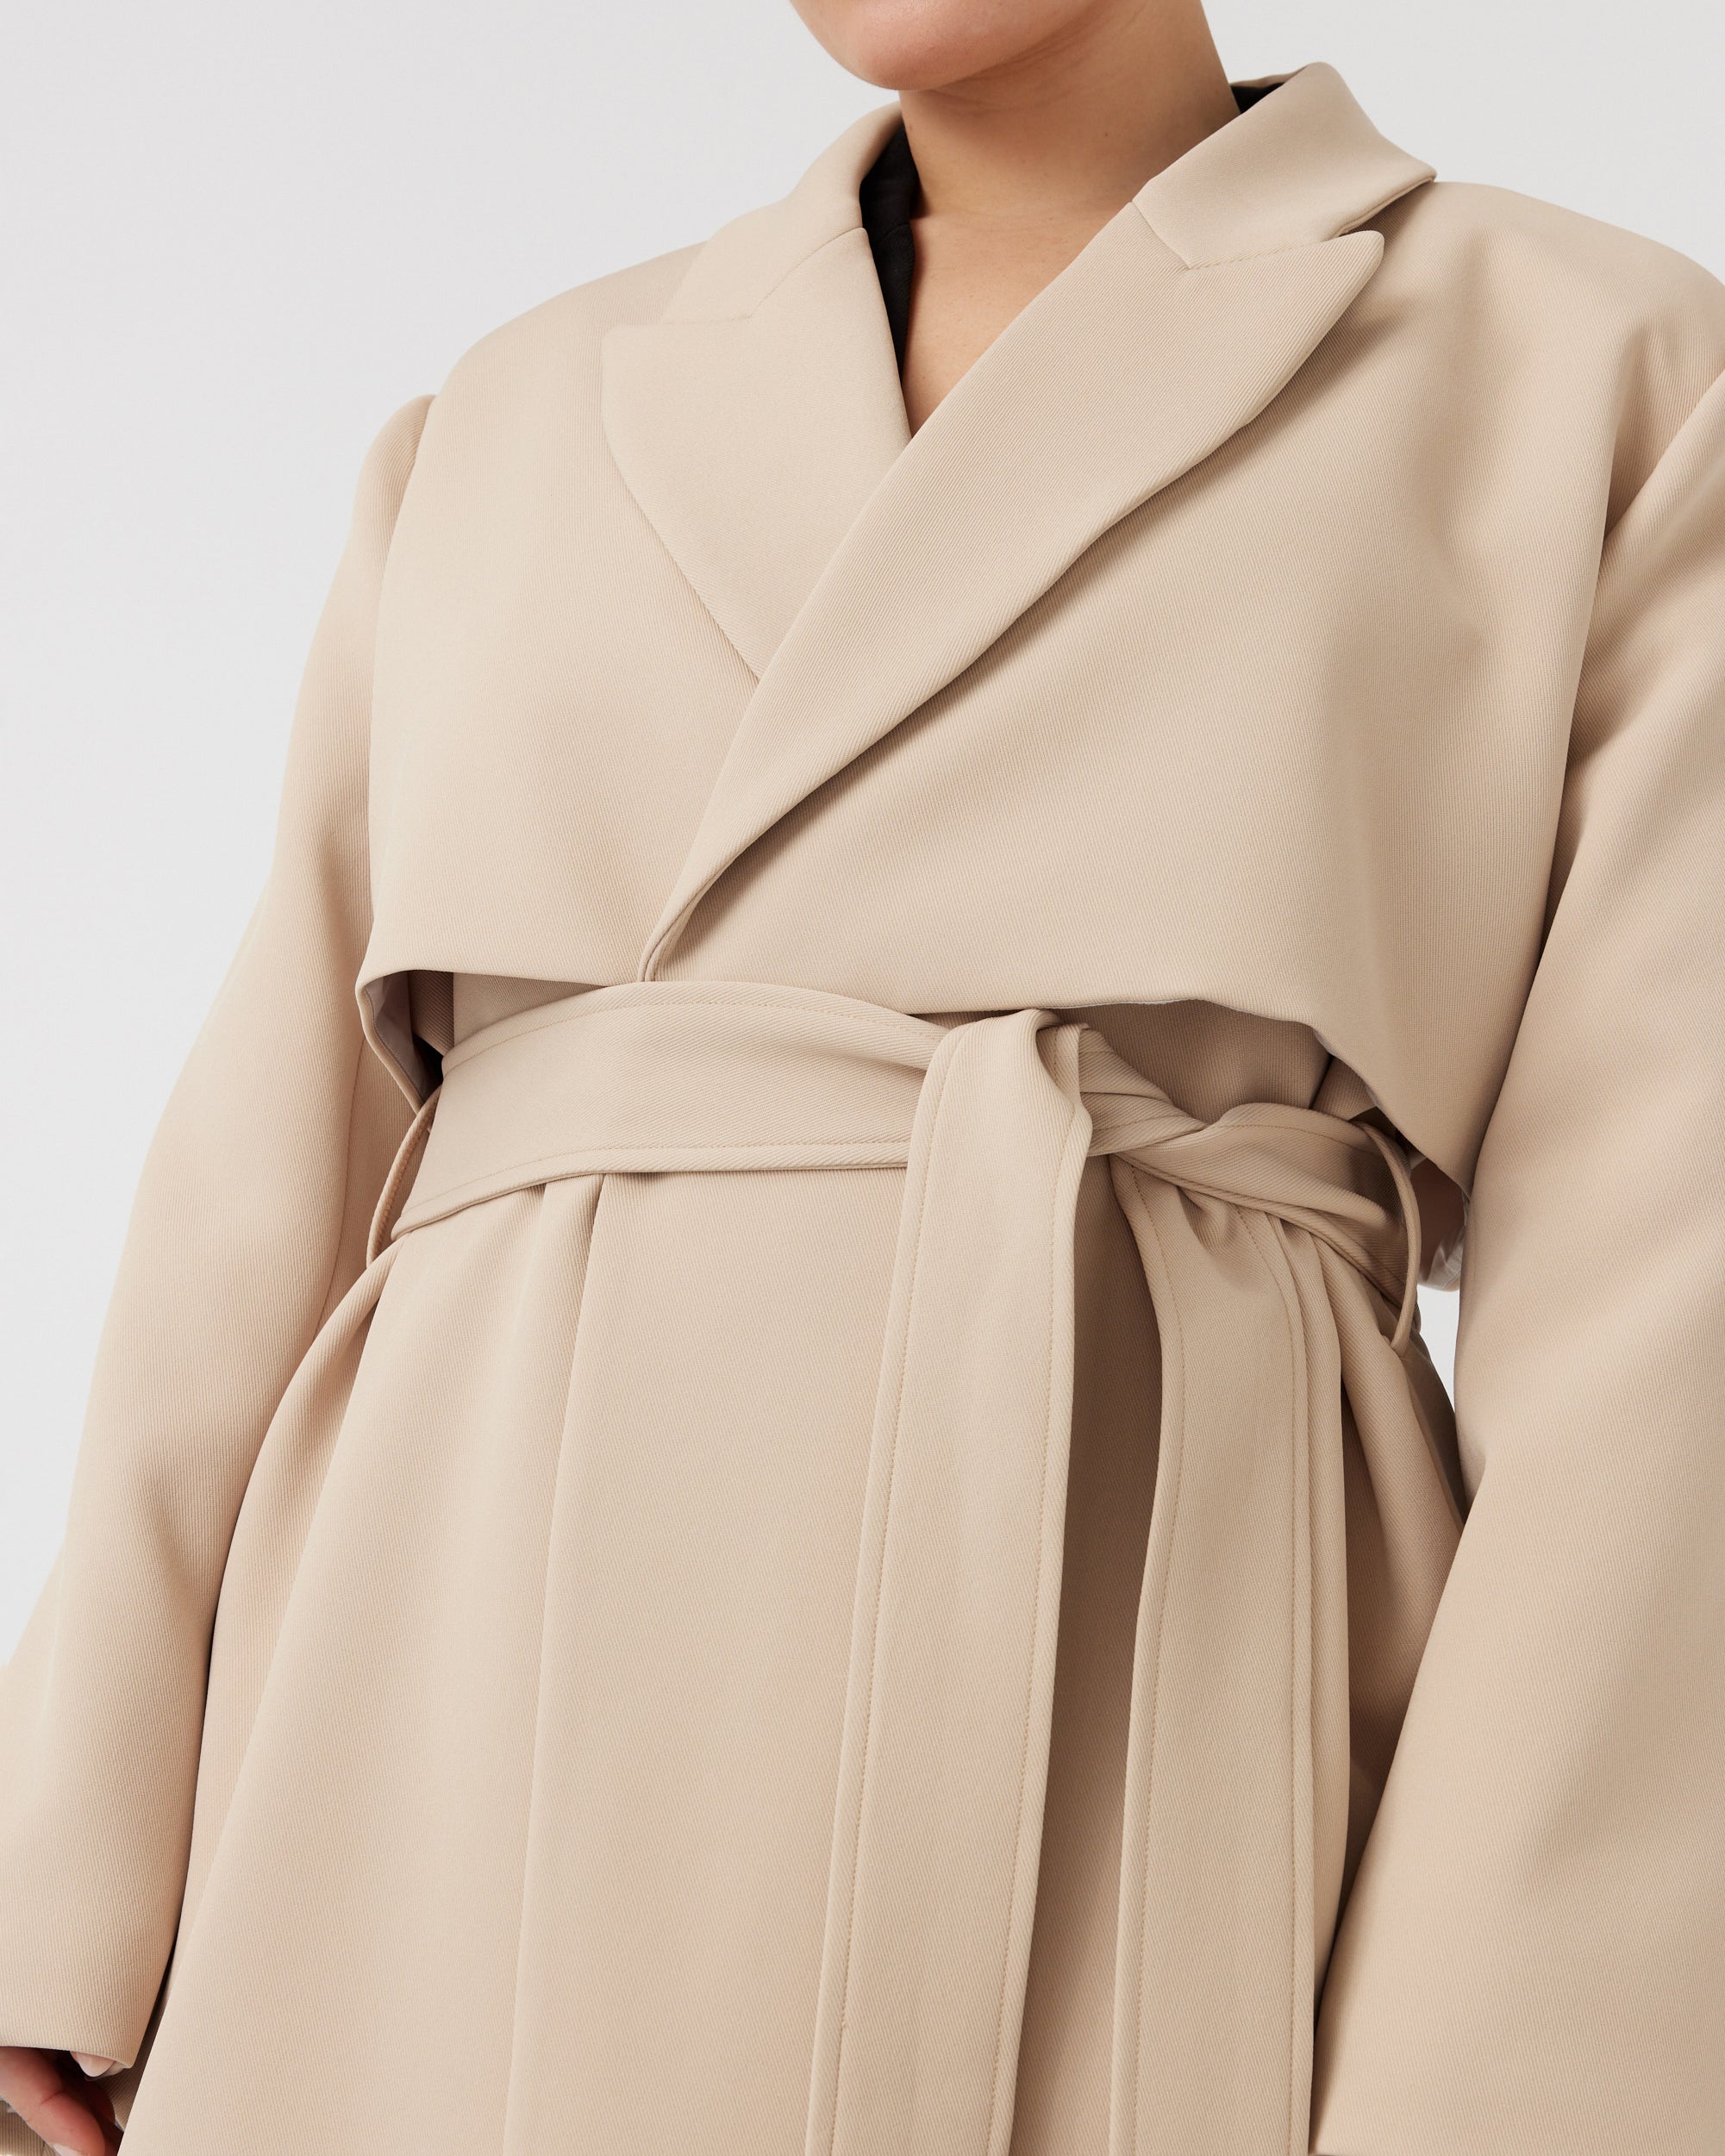 Detail image of a curvaceous woman wearing a minimalistic trench coat in taupe with storm flap detail, tied up around her waist with a taupe waist belt